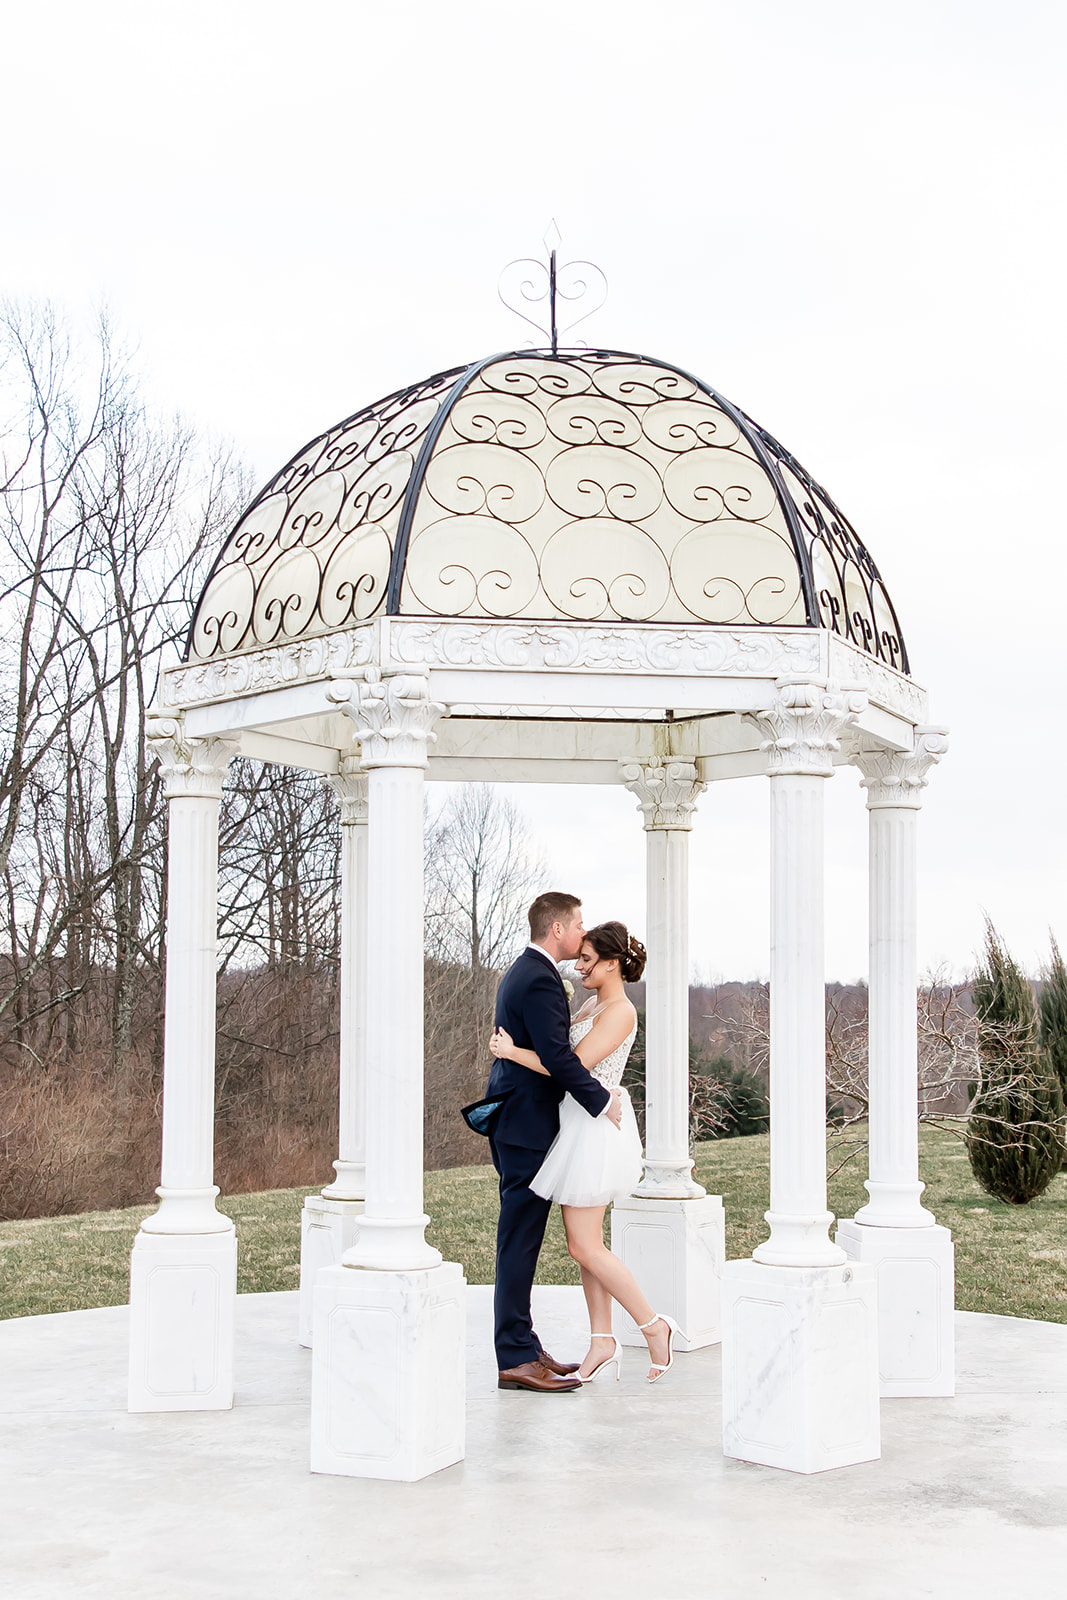 A snowy and cold outdoor wedding at Bella Amore Enchanted Acres